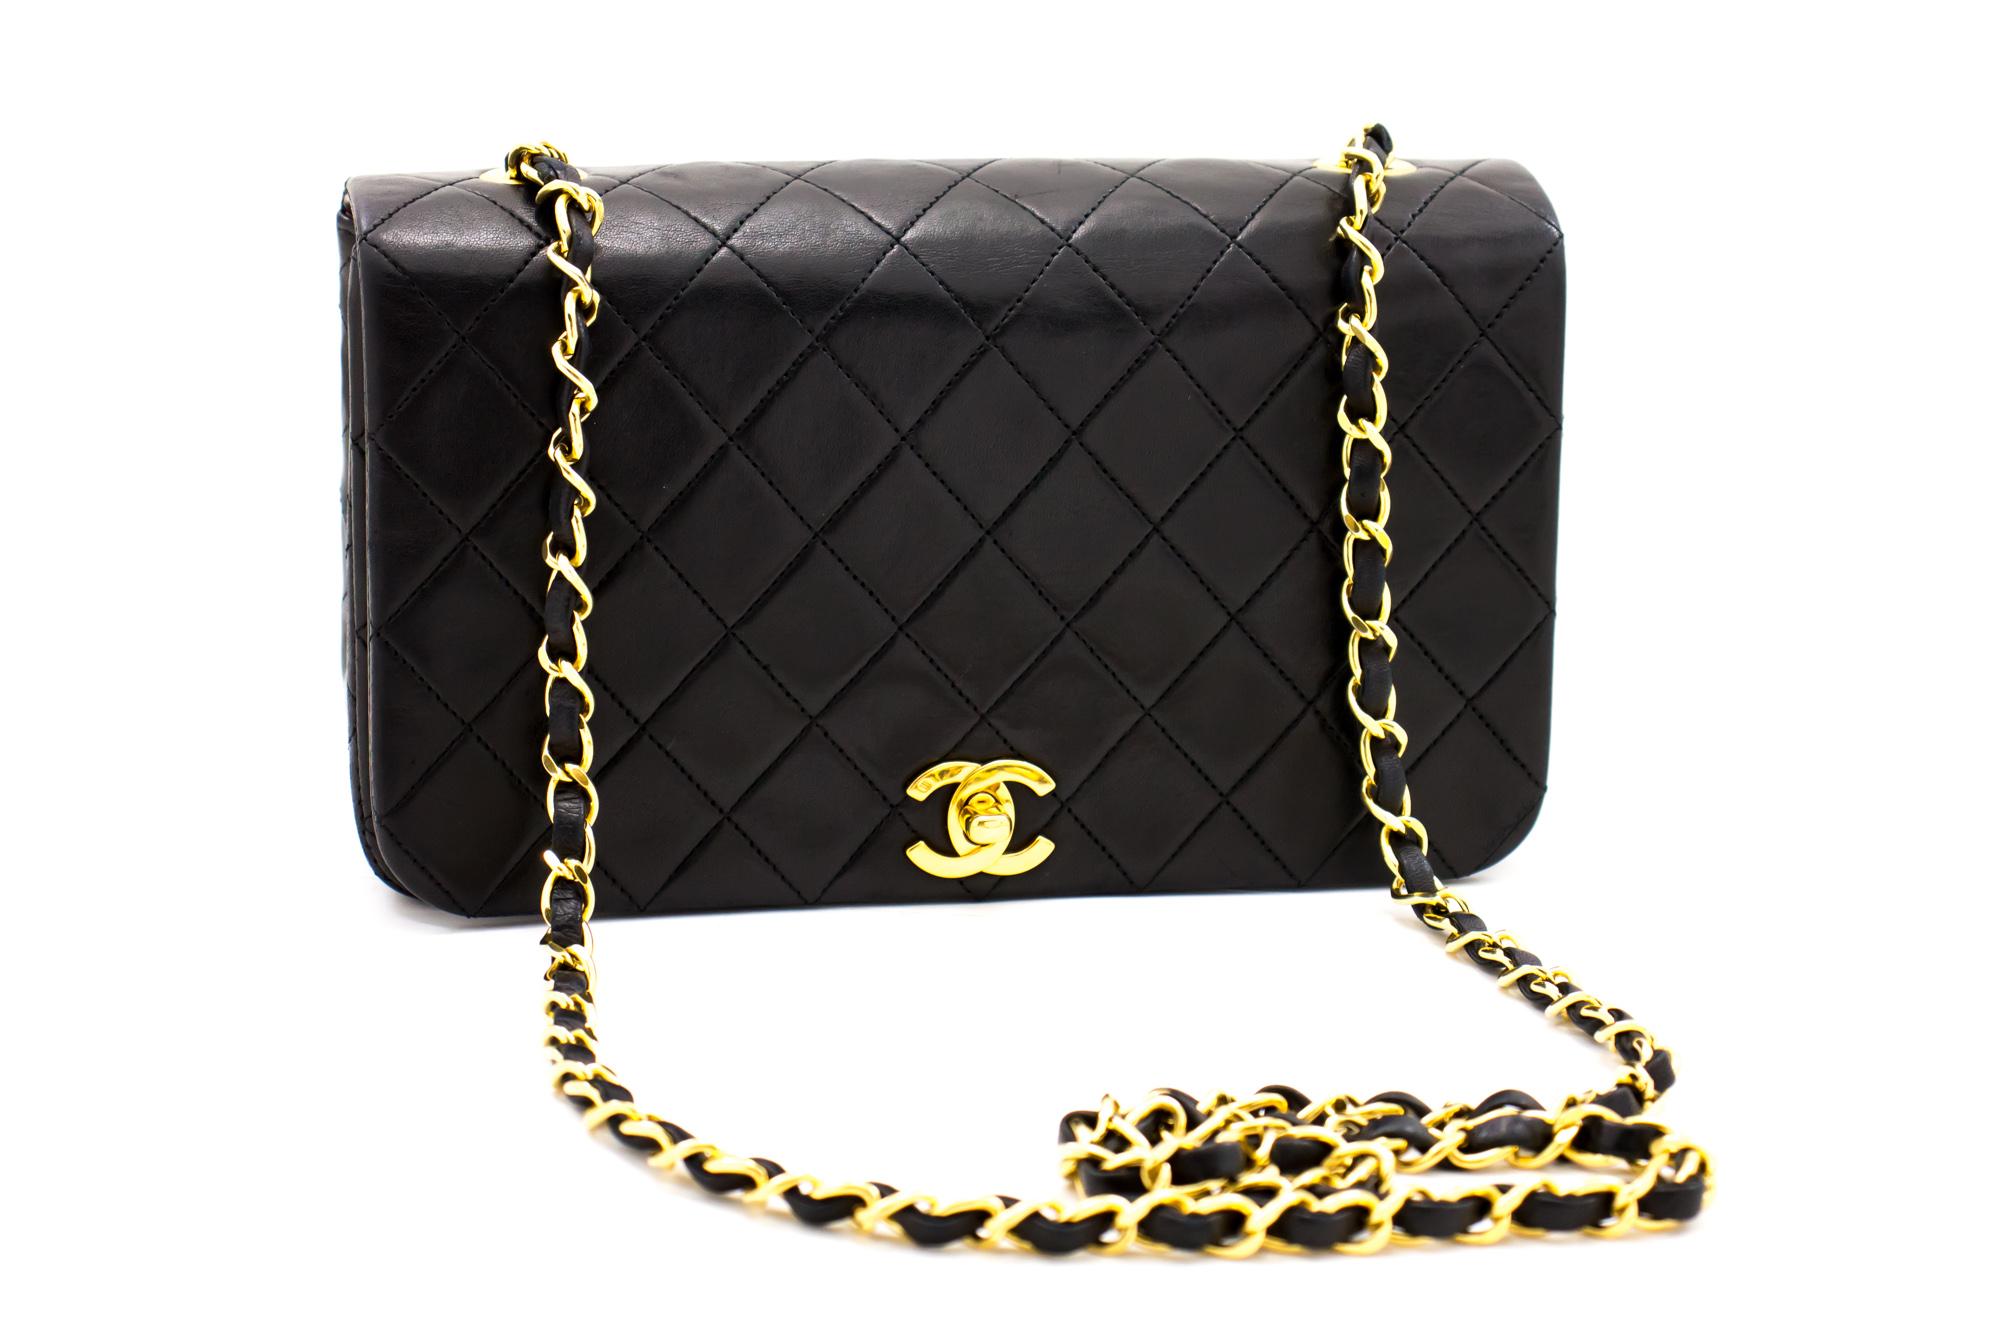 An authentic CHANEL Chain Shoulder Bag Crossbody Black Quilted Flap made of black Lambskin. The color is Black. The outside material is Leather. The pattern is Solid. This item is Vintage / Classic. The year of manufacture would be